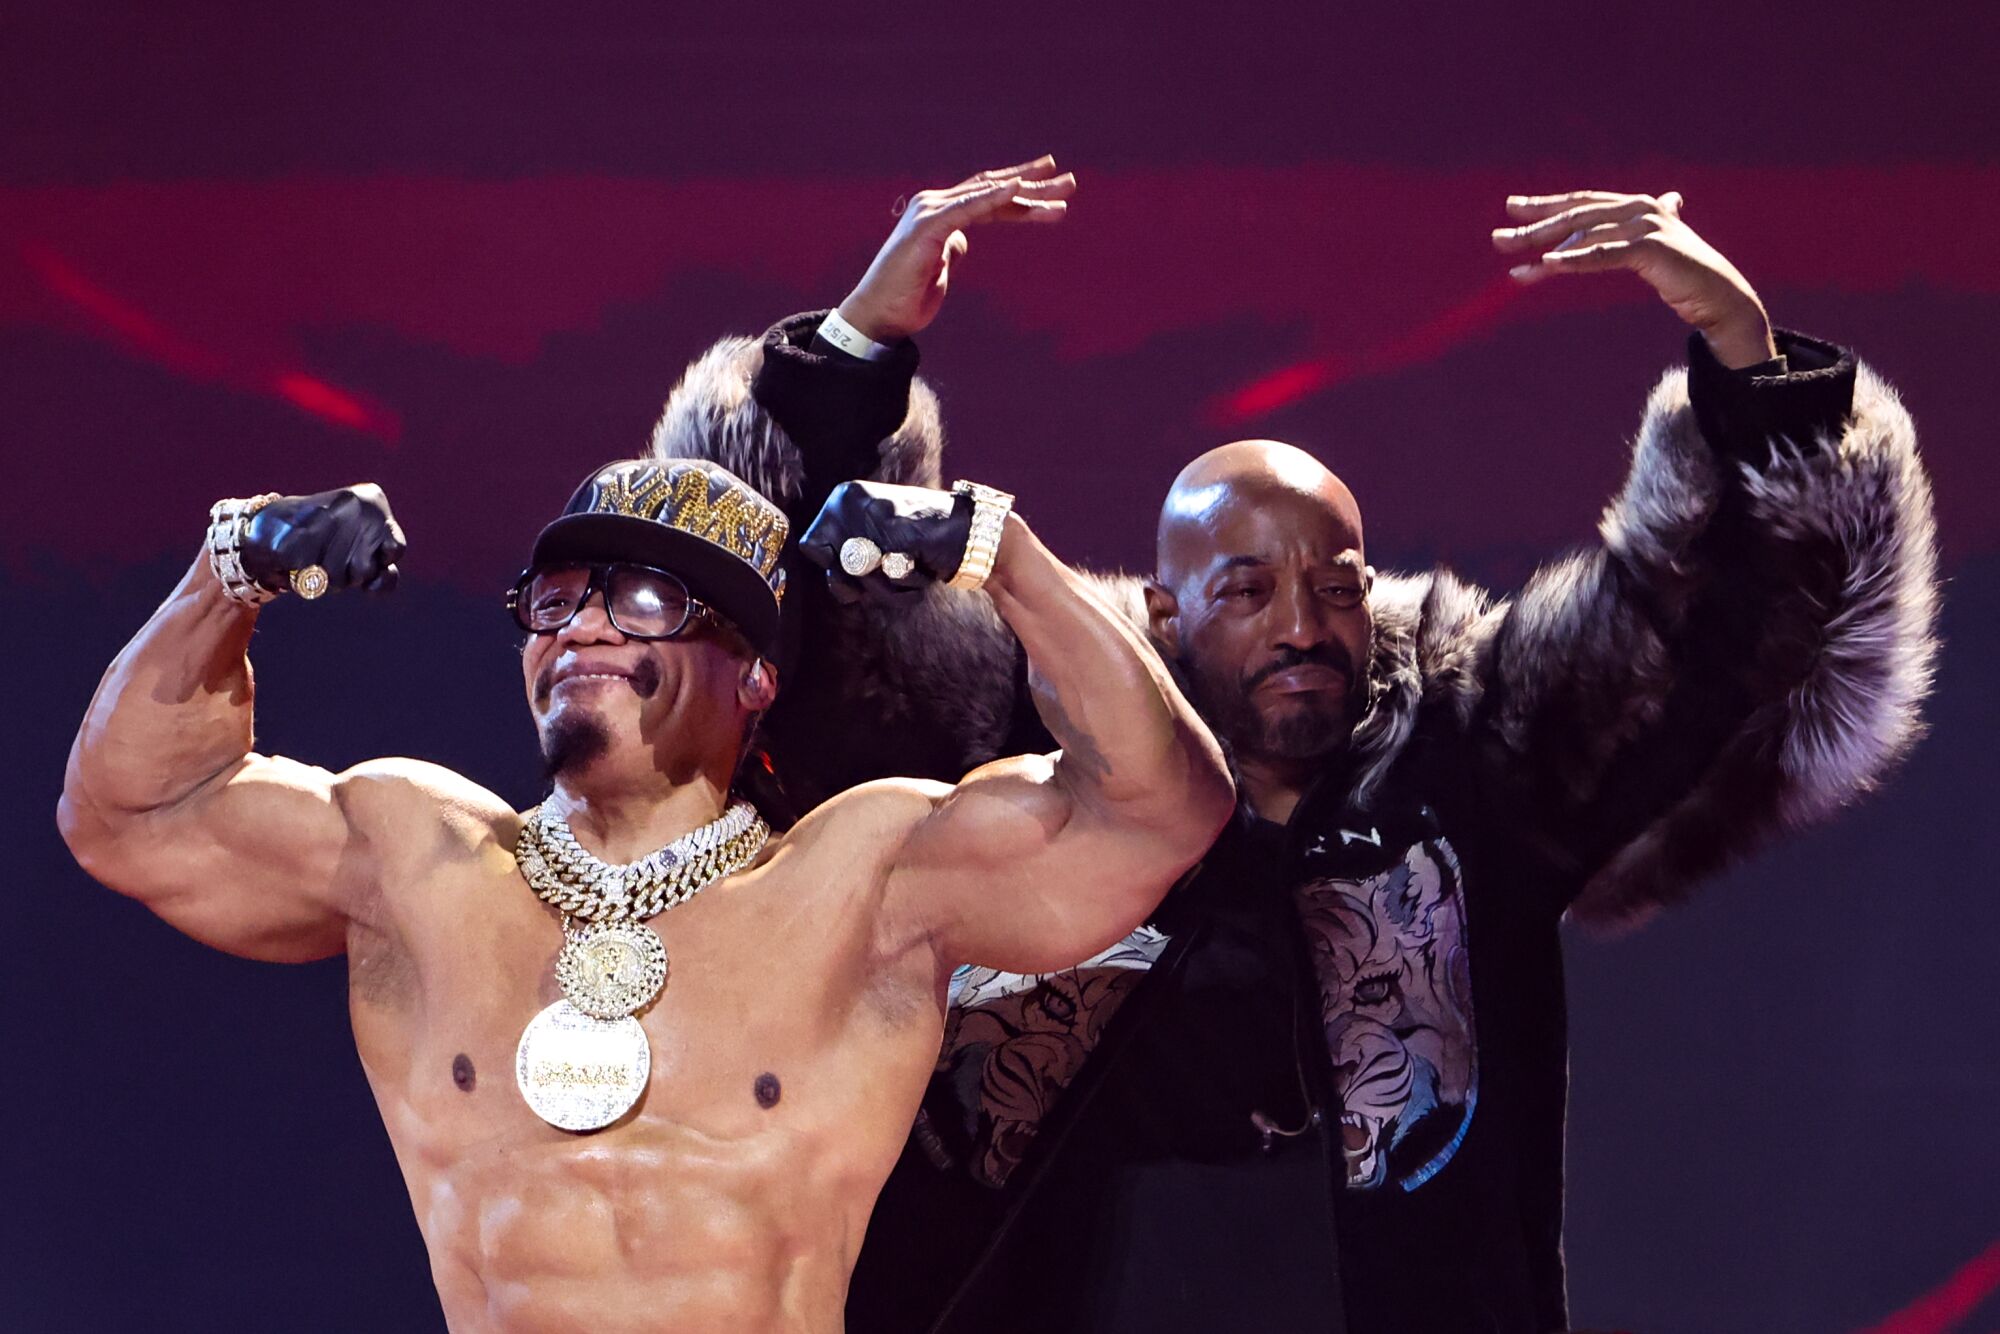 Melle Mel, left, performs at the 65th Grammy Awards, held at the Crytpo.com Arena.